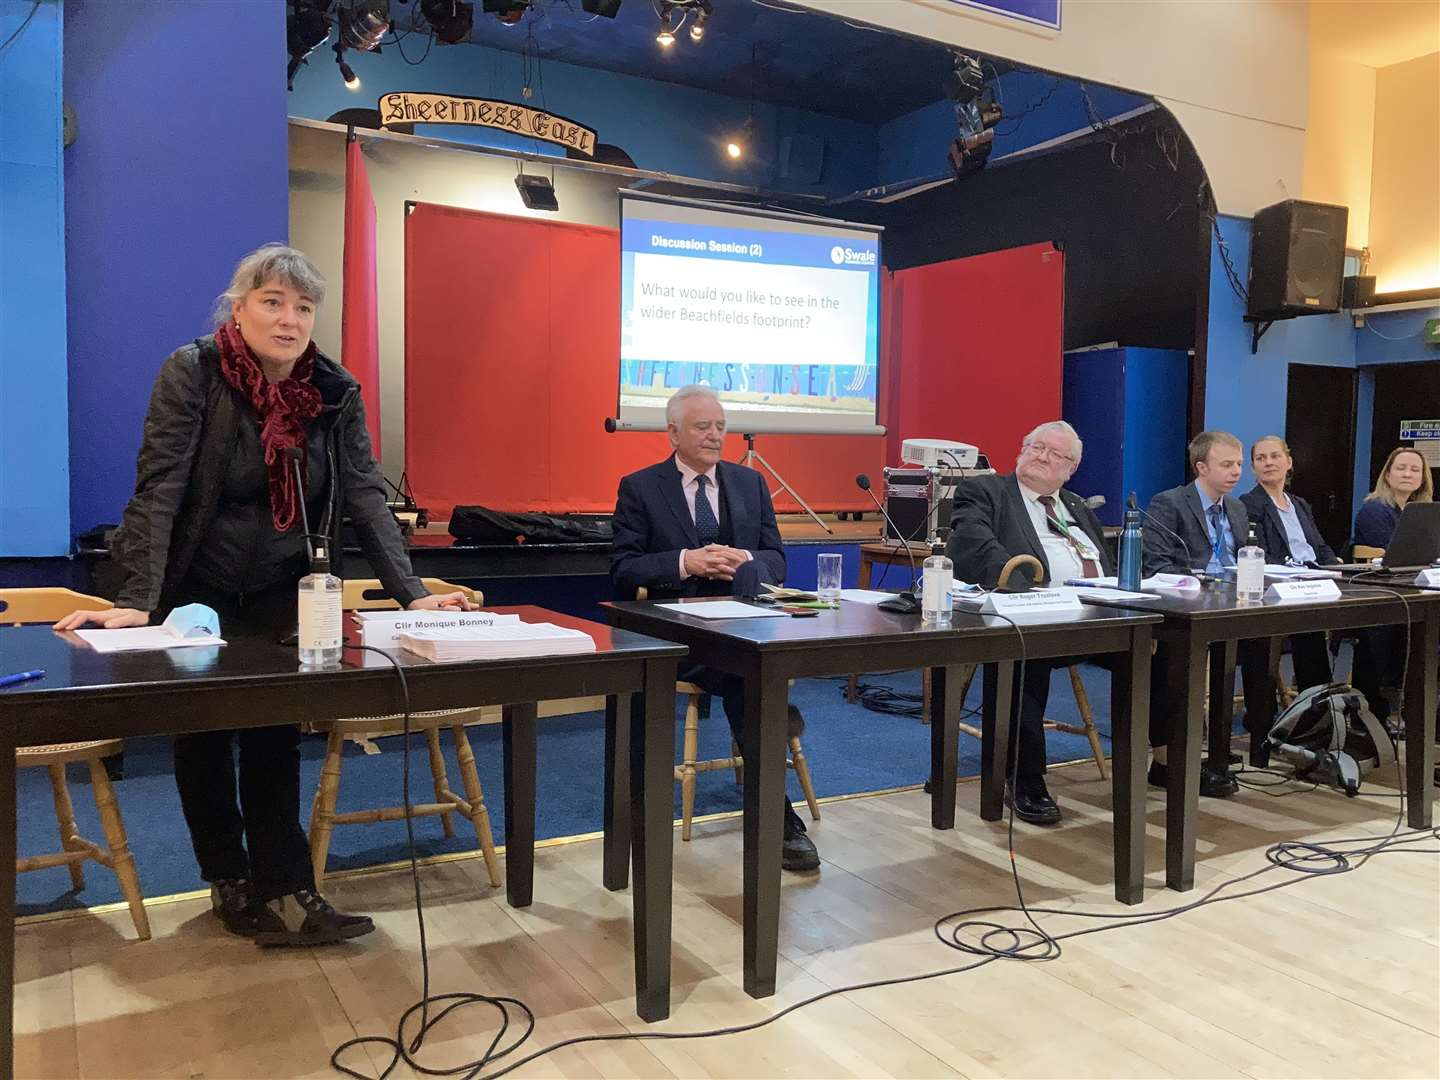 Cllr Monique Bonney taking questions at Sheerness East WMC for the extraordinary meeting of the Sheppey Area Committee to discus Swale council's bid for £20m to level-up Sheerness